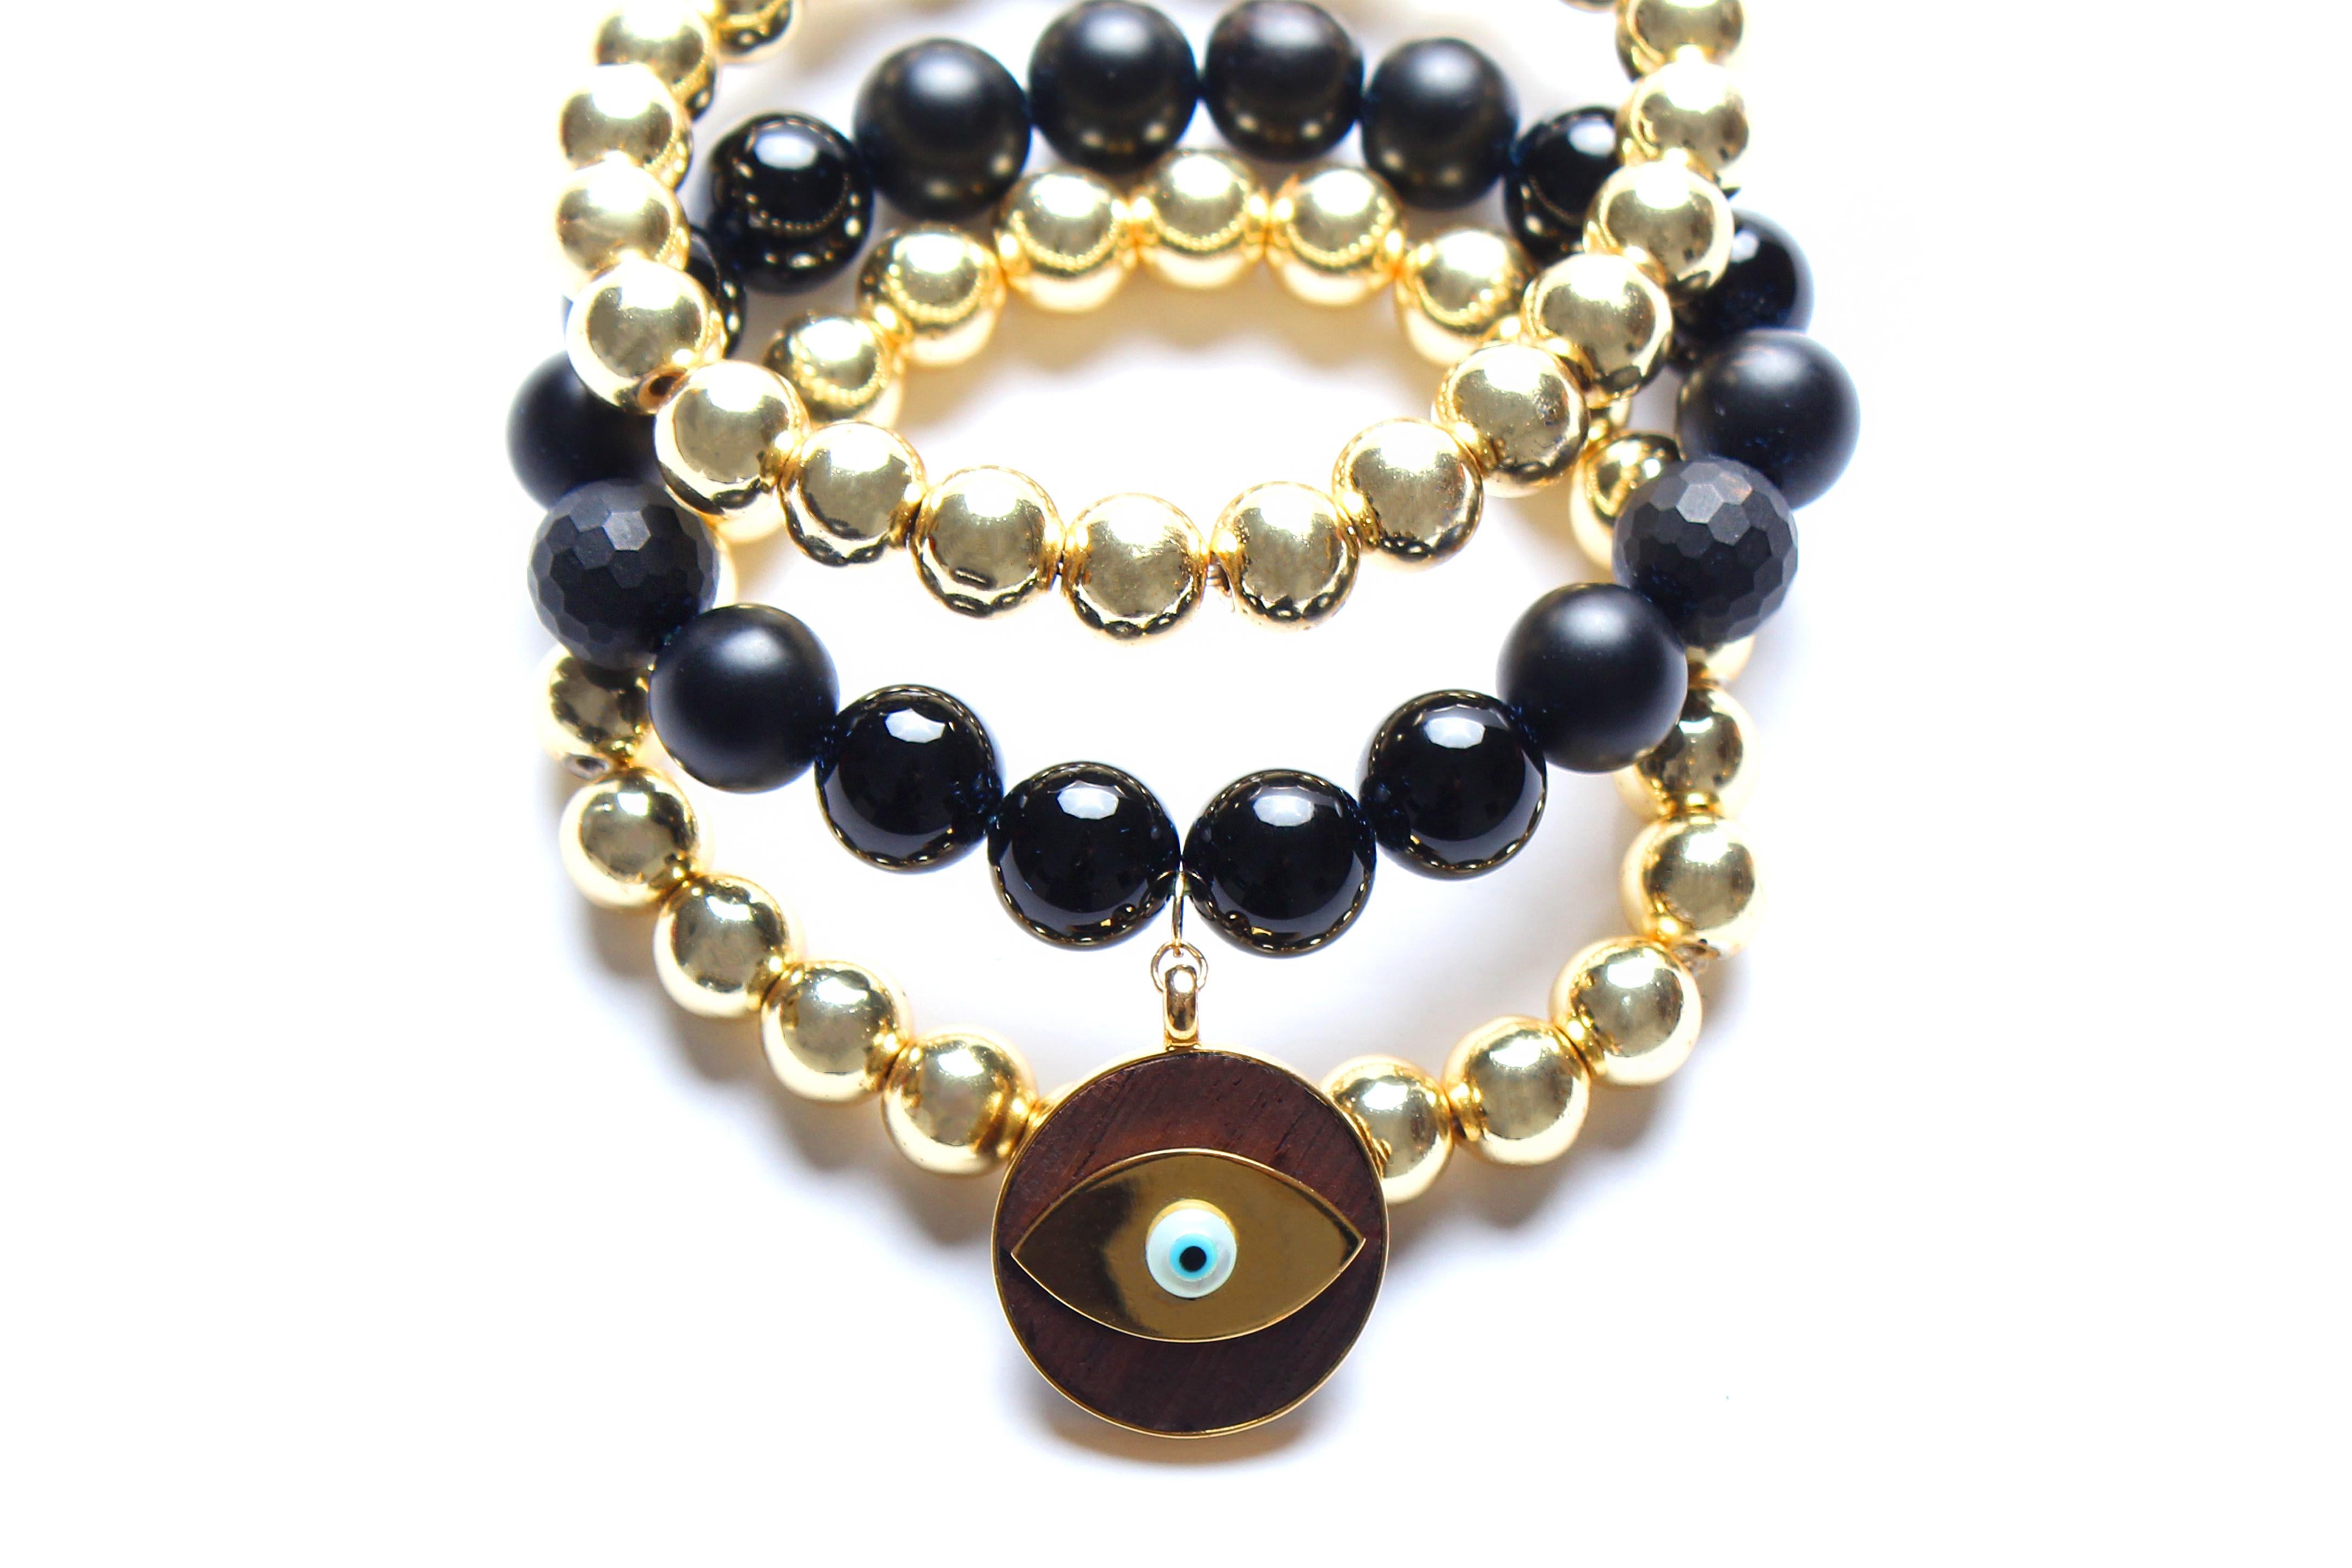 PRICE ADJUSTED TO ALTERATIONS LISTED BELOW:

NOW ONLY 4 BRACELETS AVAILABLE:

Bracelet 1 & 2: plain 8mm hematite 14k gold plated beaded bracelets
Bracelet 3 : 8mm hematite 14k gold plated beads, ebony, 14k gold, enamel evil eye charms
Bracelet 4: